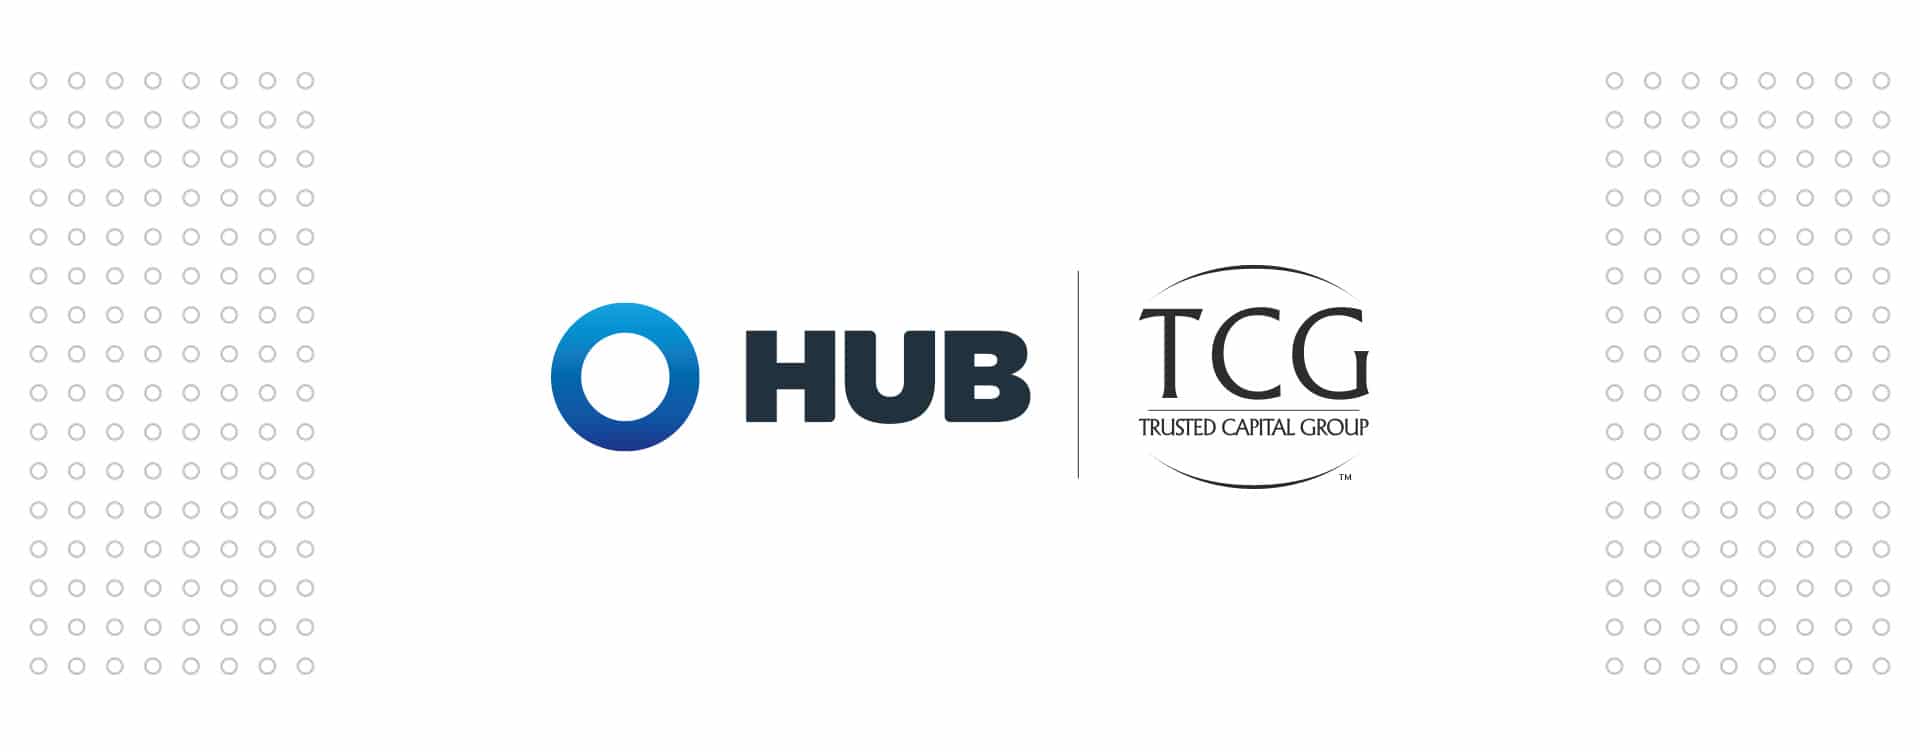 HUB International Expands Retirement and Private Wealth Capabilities With Acquisition of Trusted Capital Group